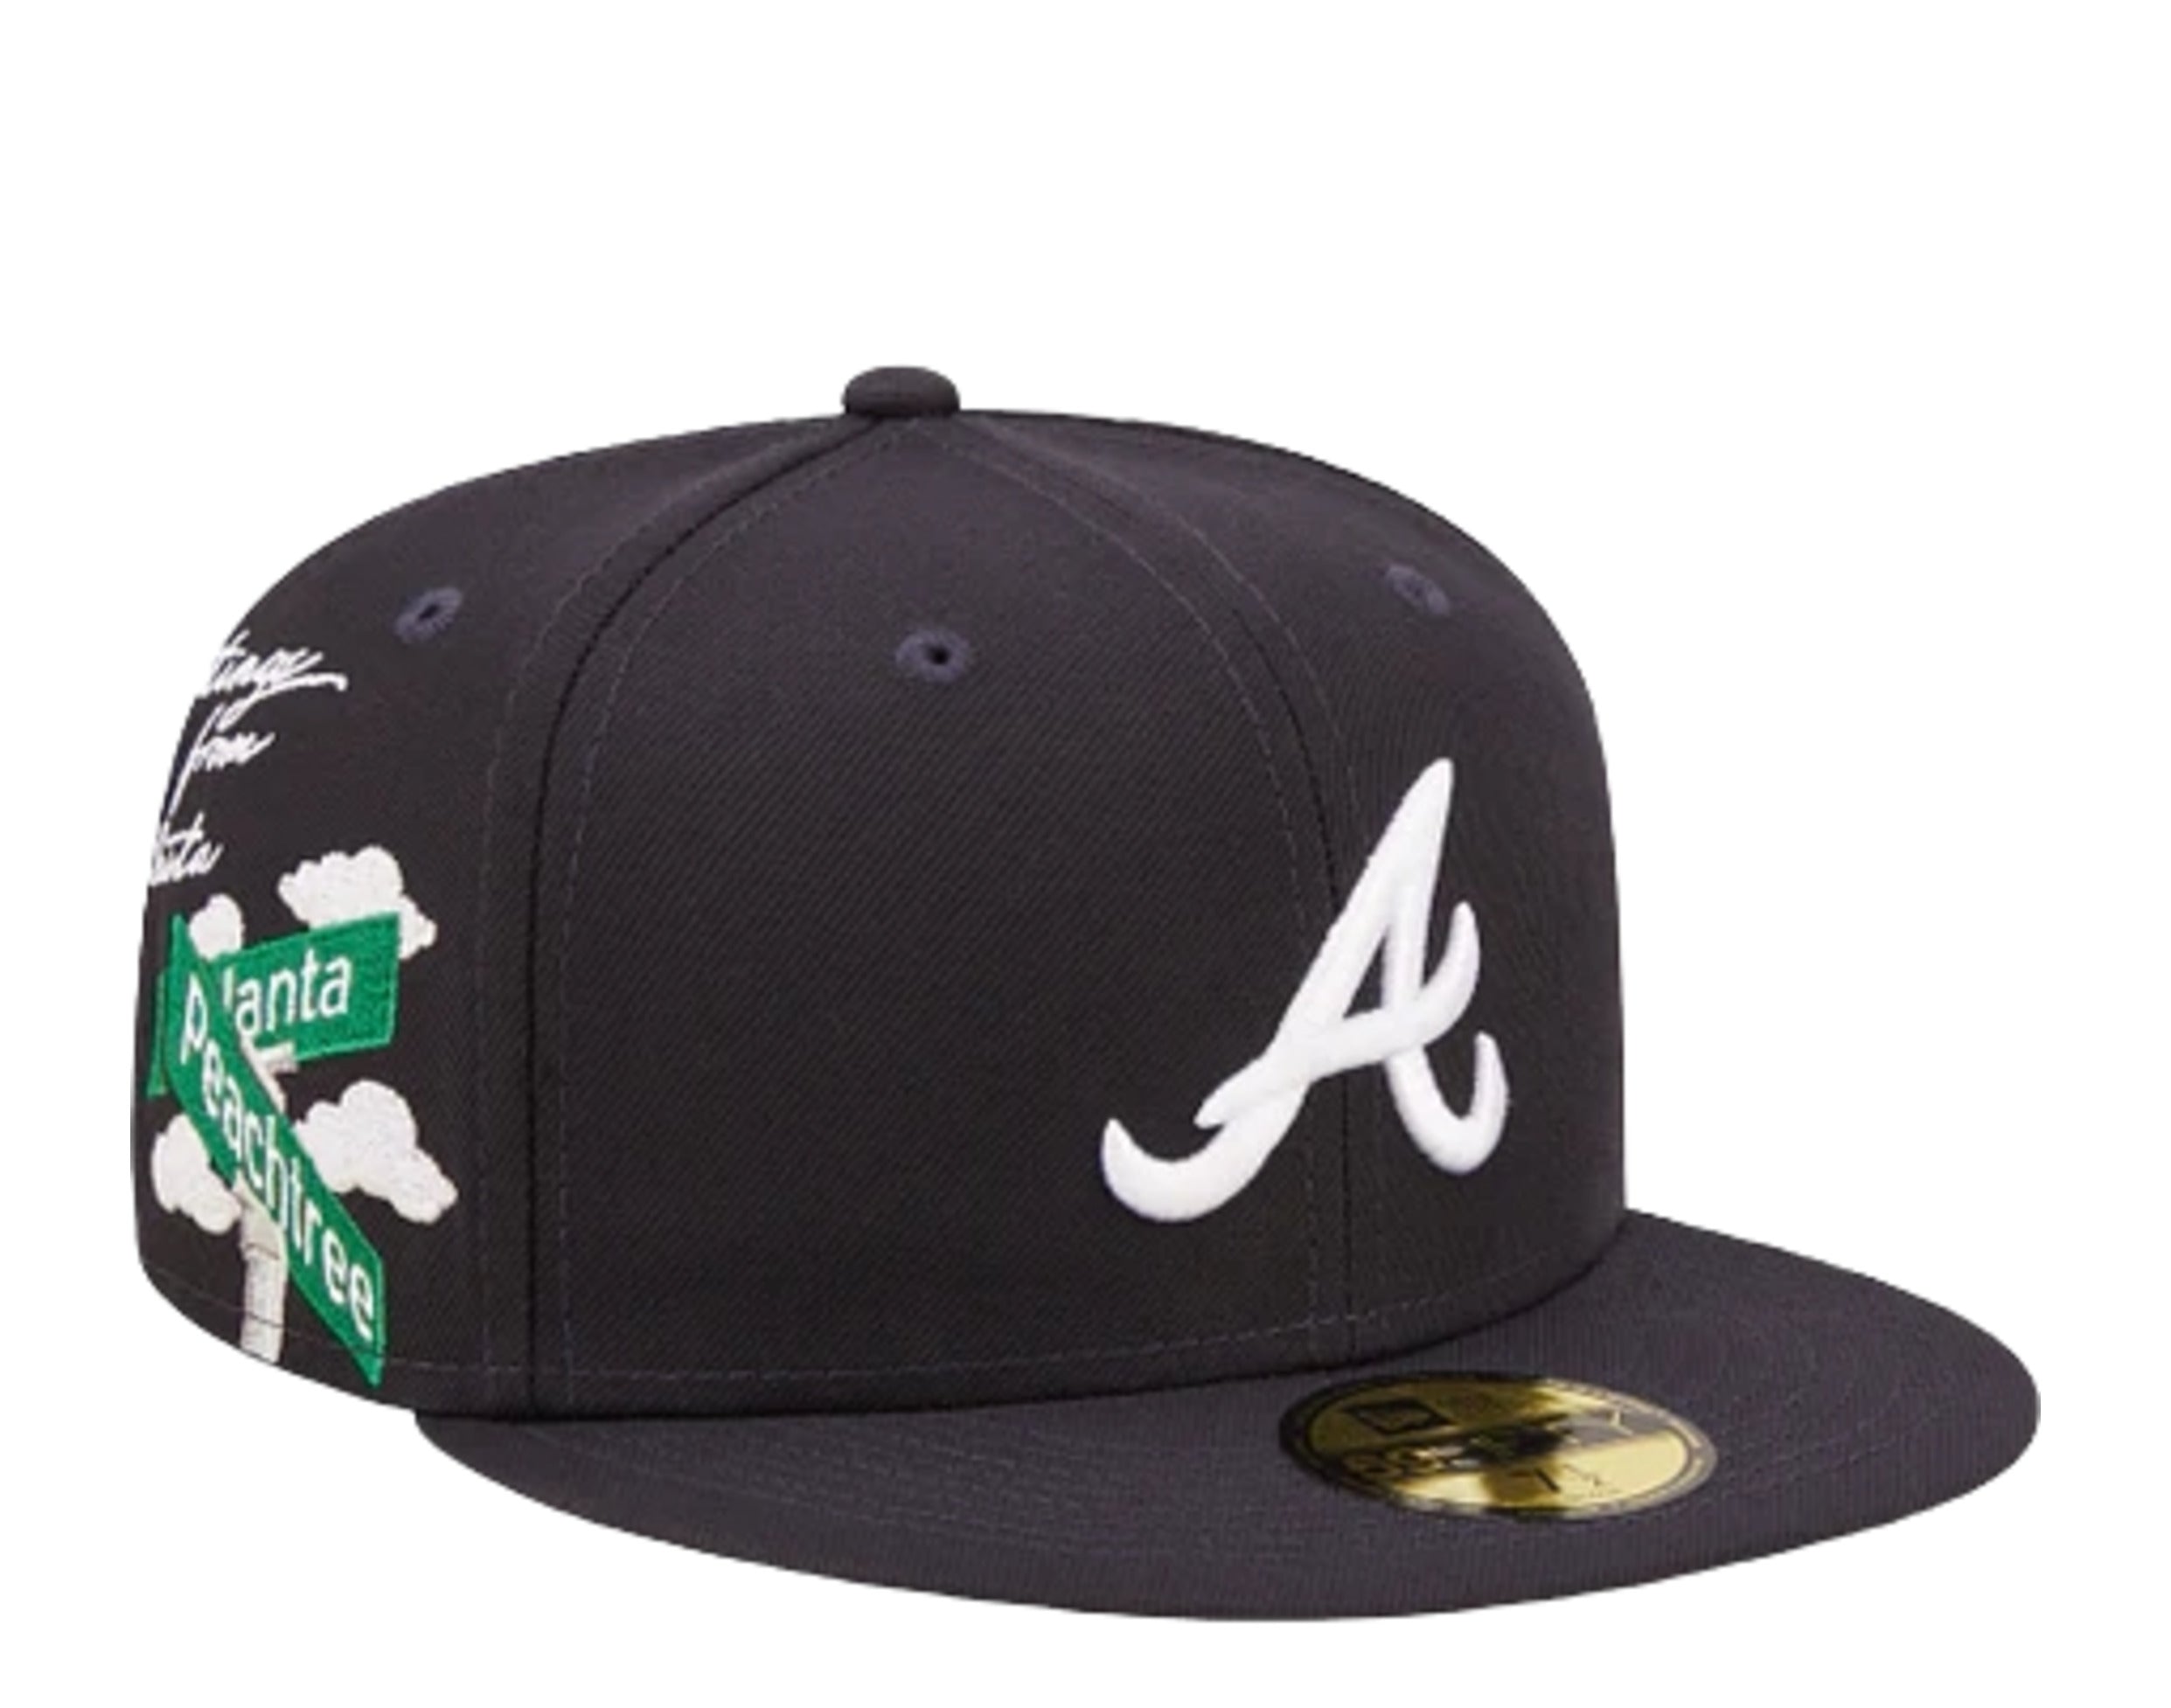 Braves unveil The A alternate uniforms and caps, Braves